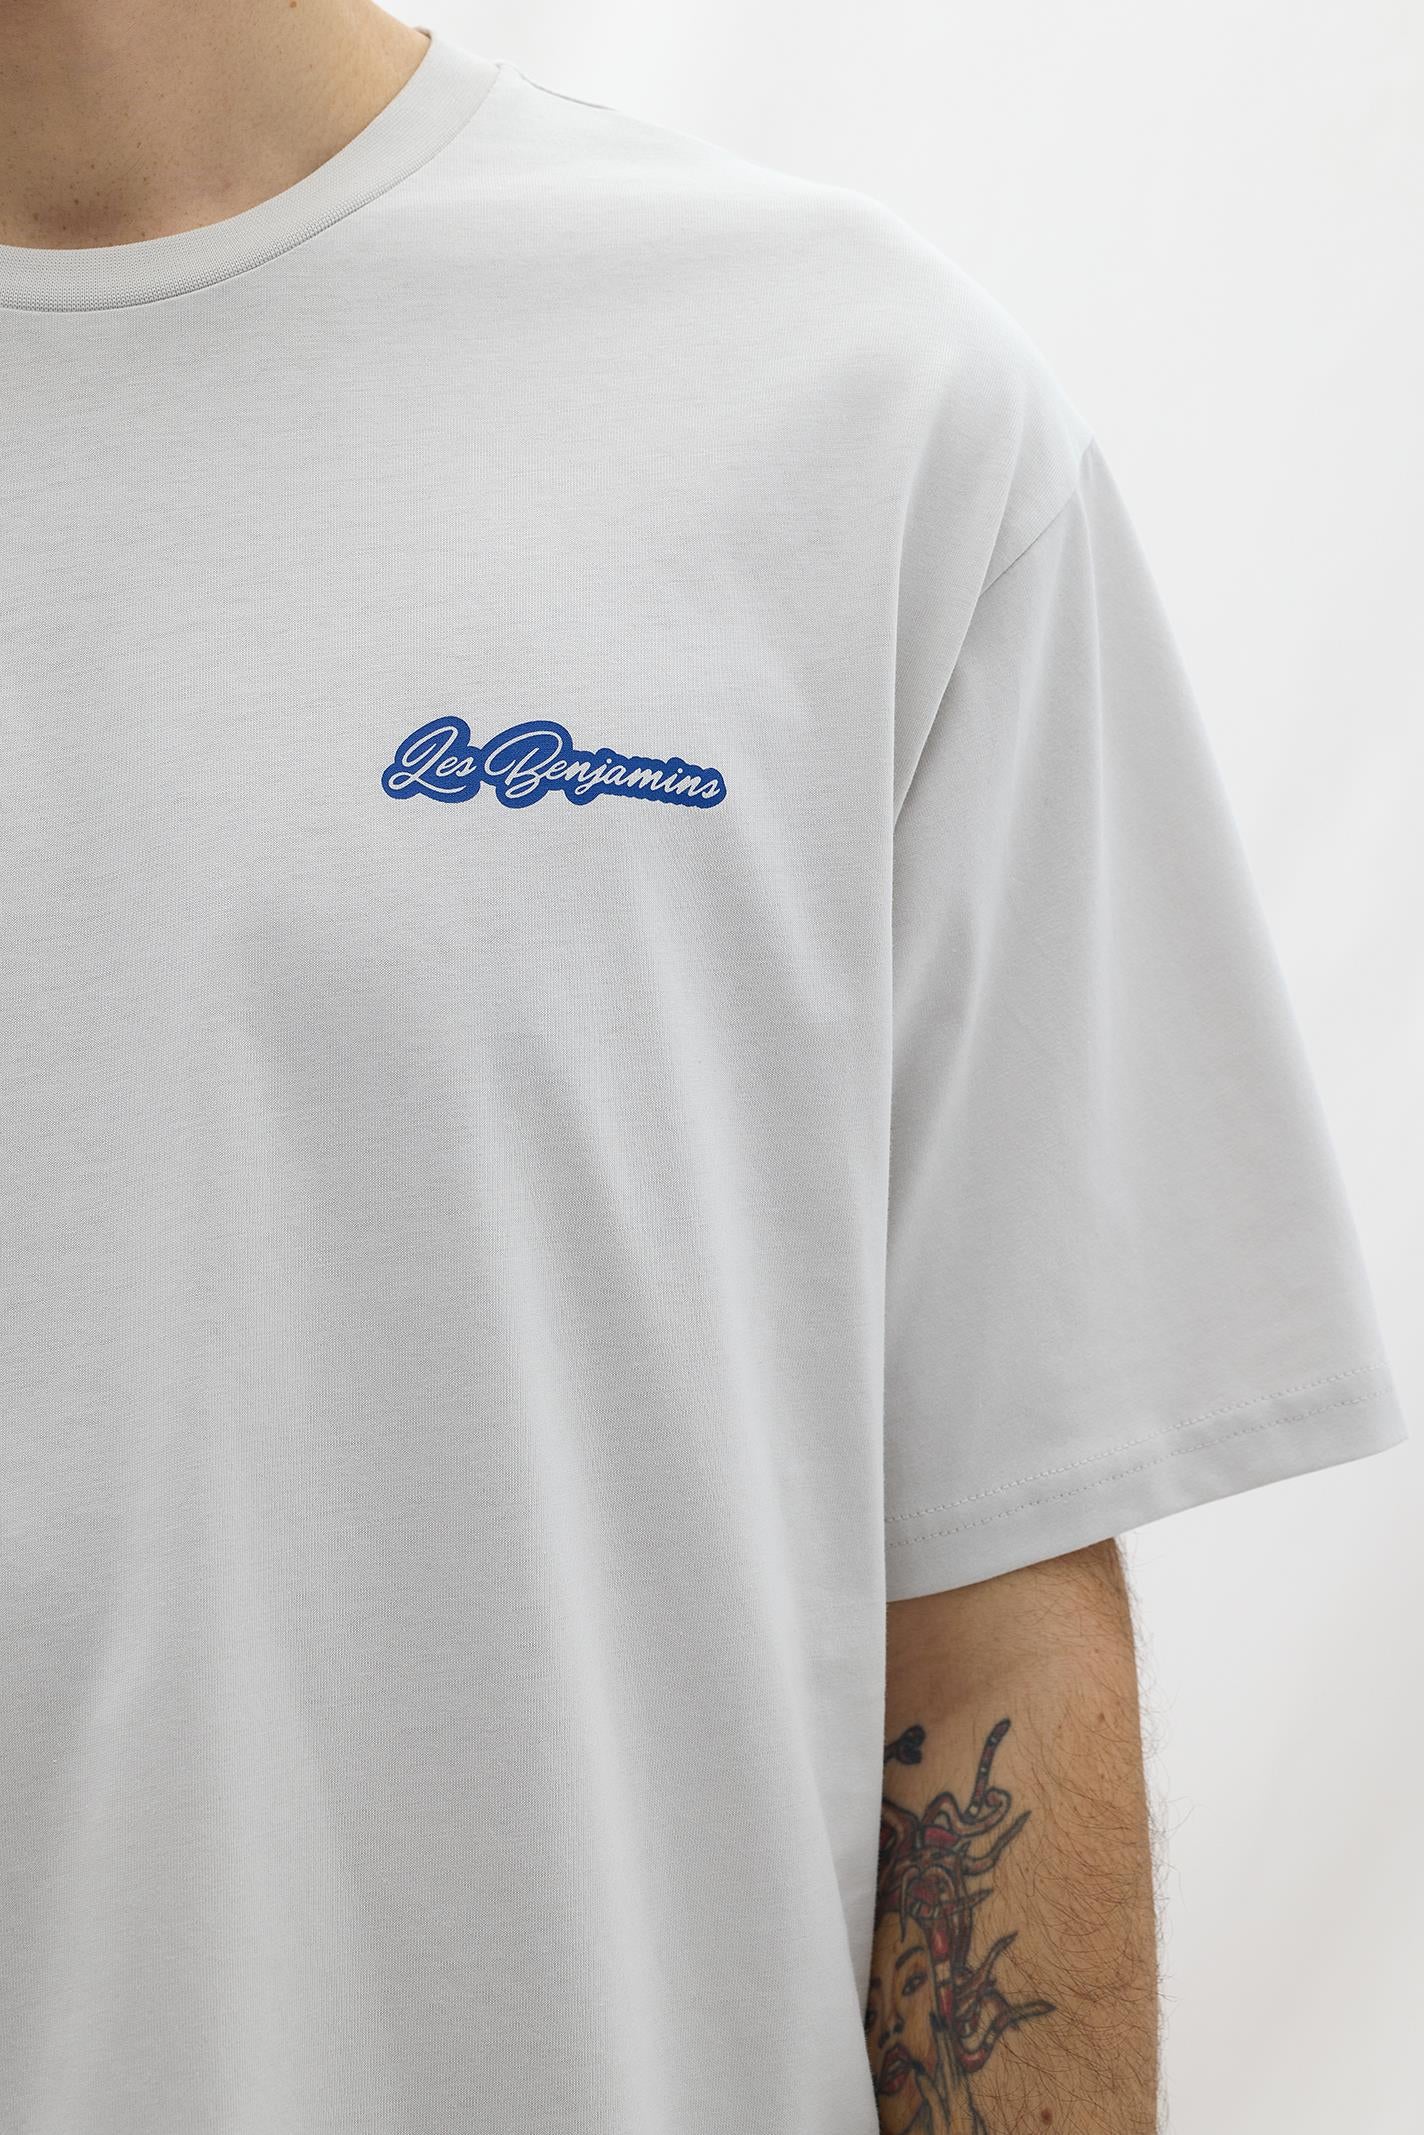  RELAXED TEE 006